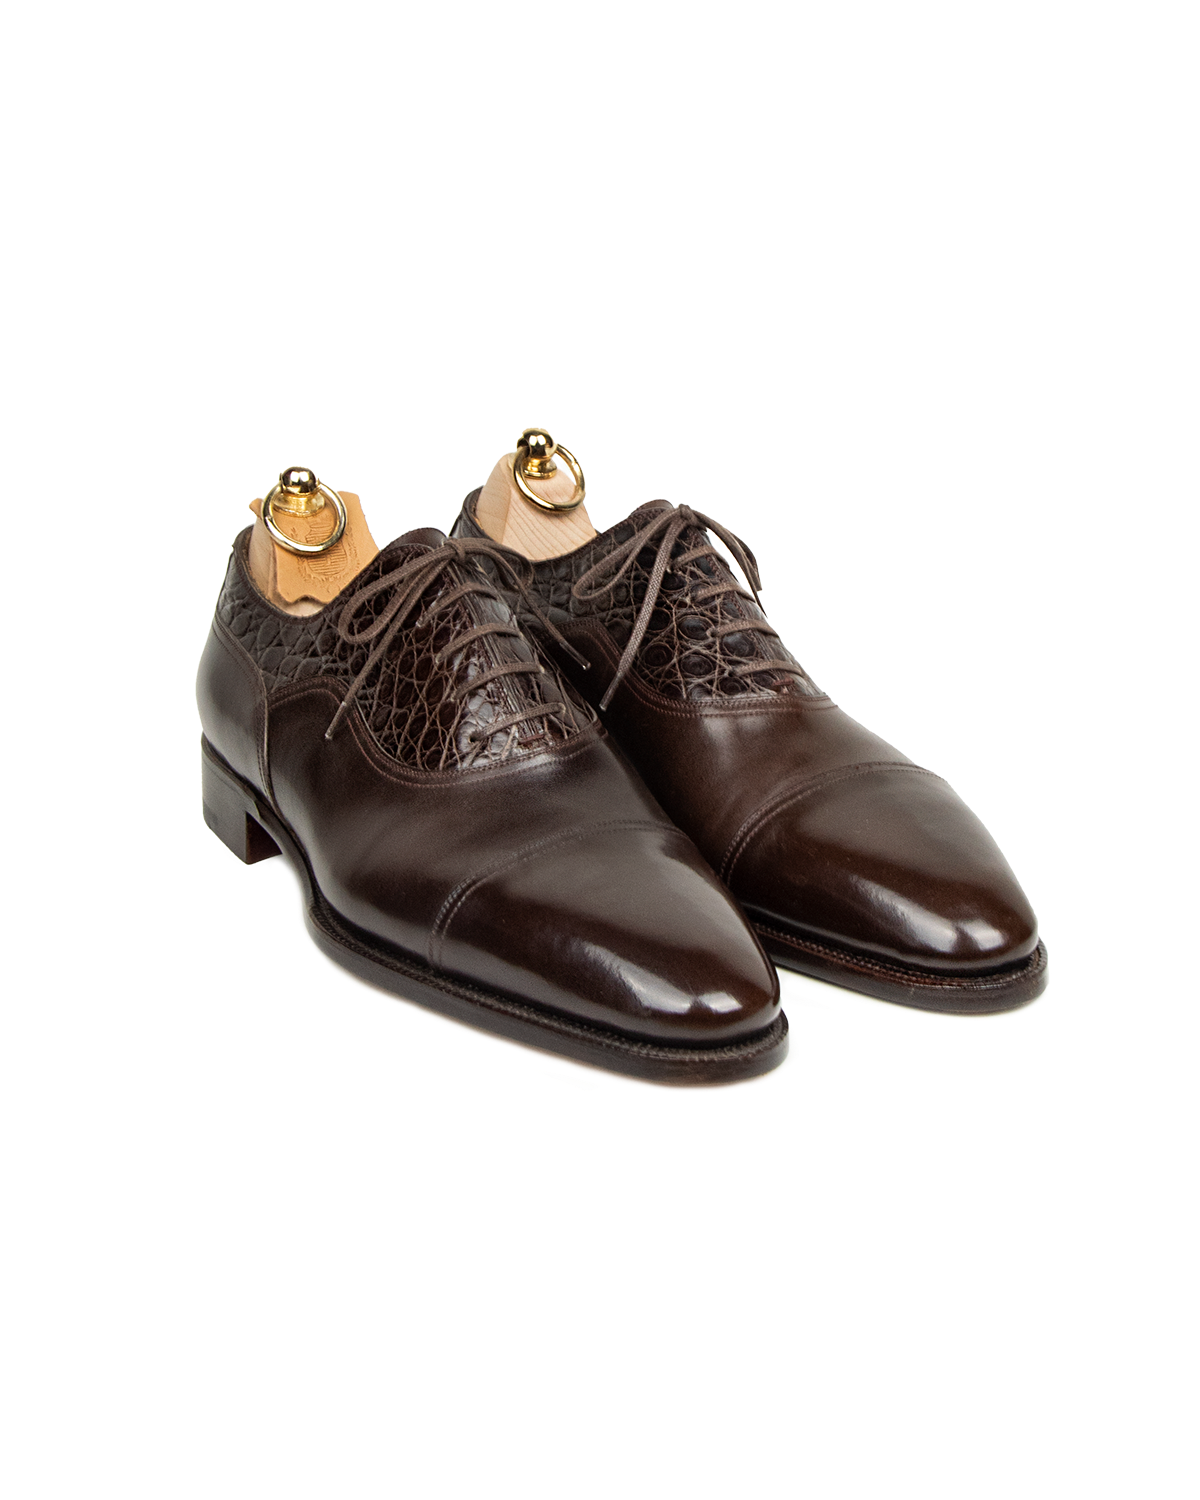 Brown Balmoral Wingtip Oxfords with patine | Stefano Bemer